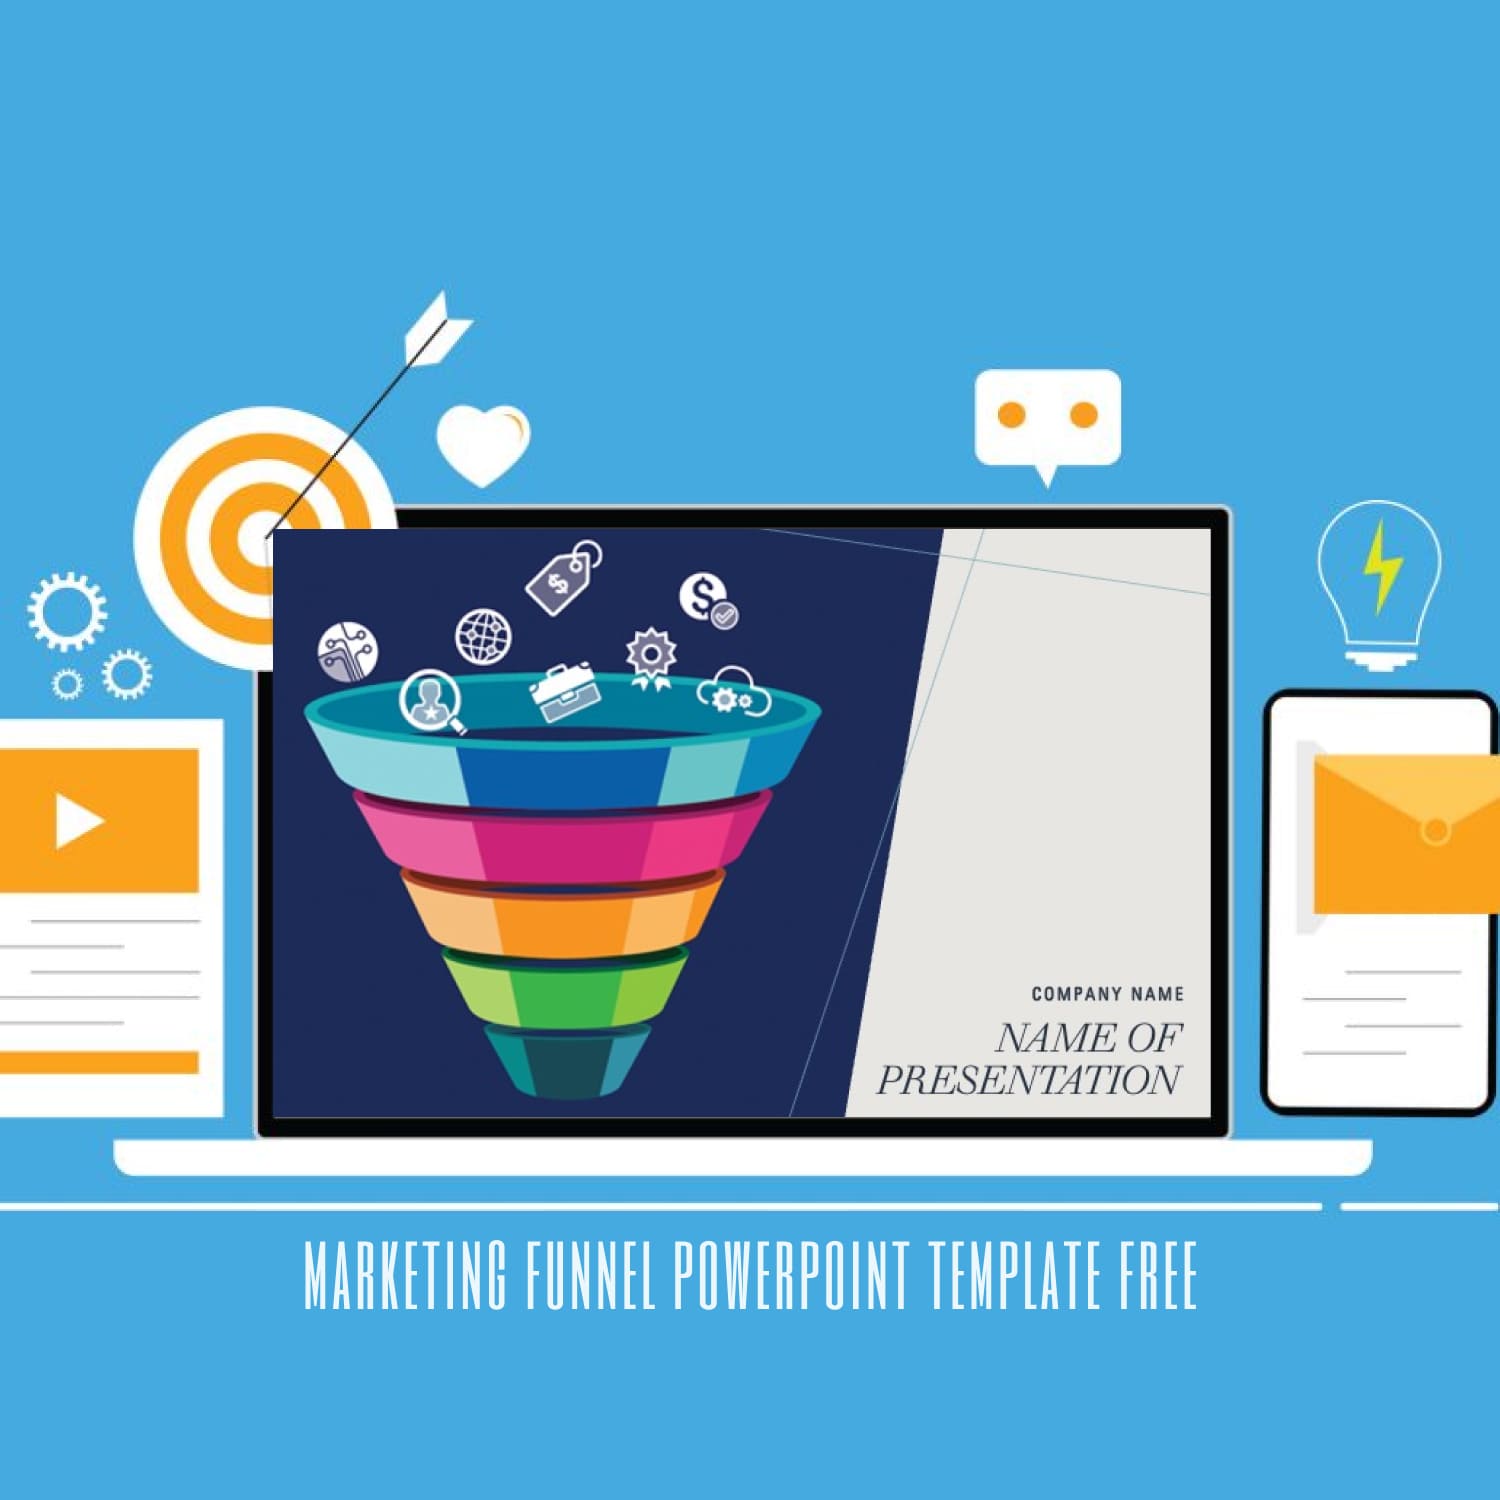 Marketing Funnel Powerpoint Template Free 1500 1.